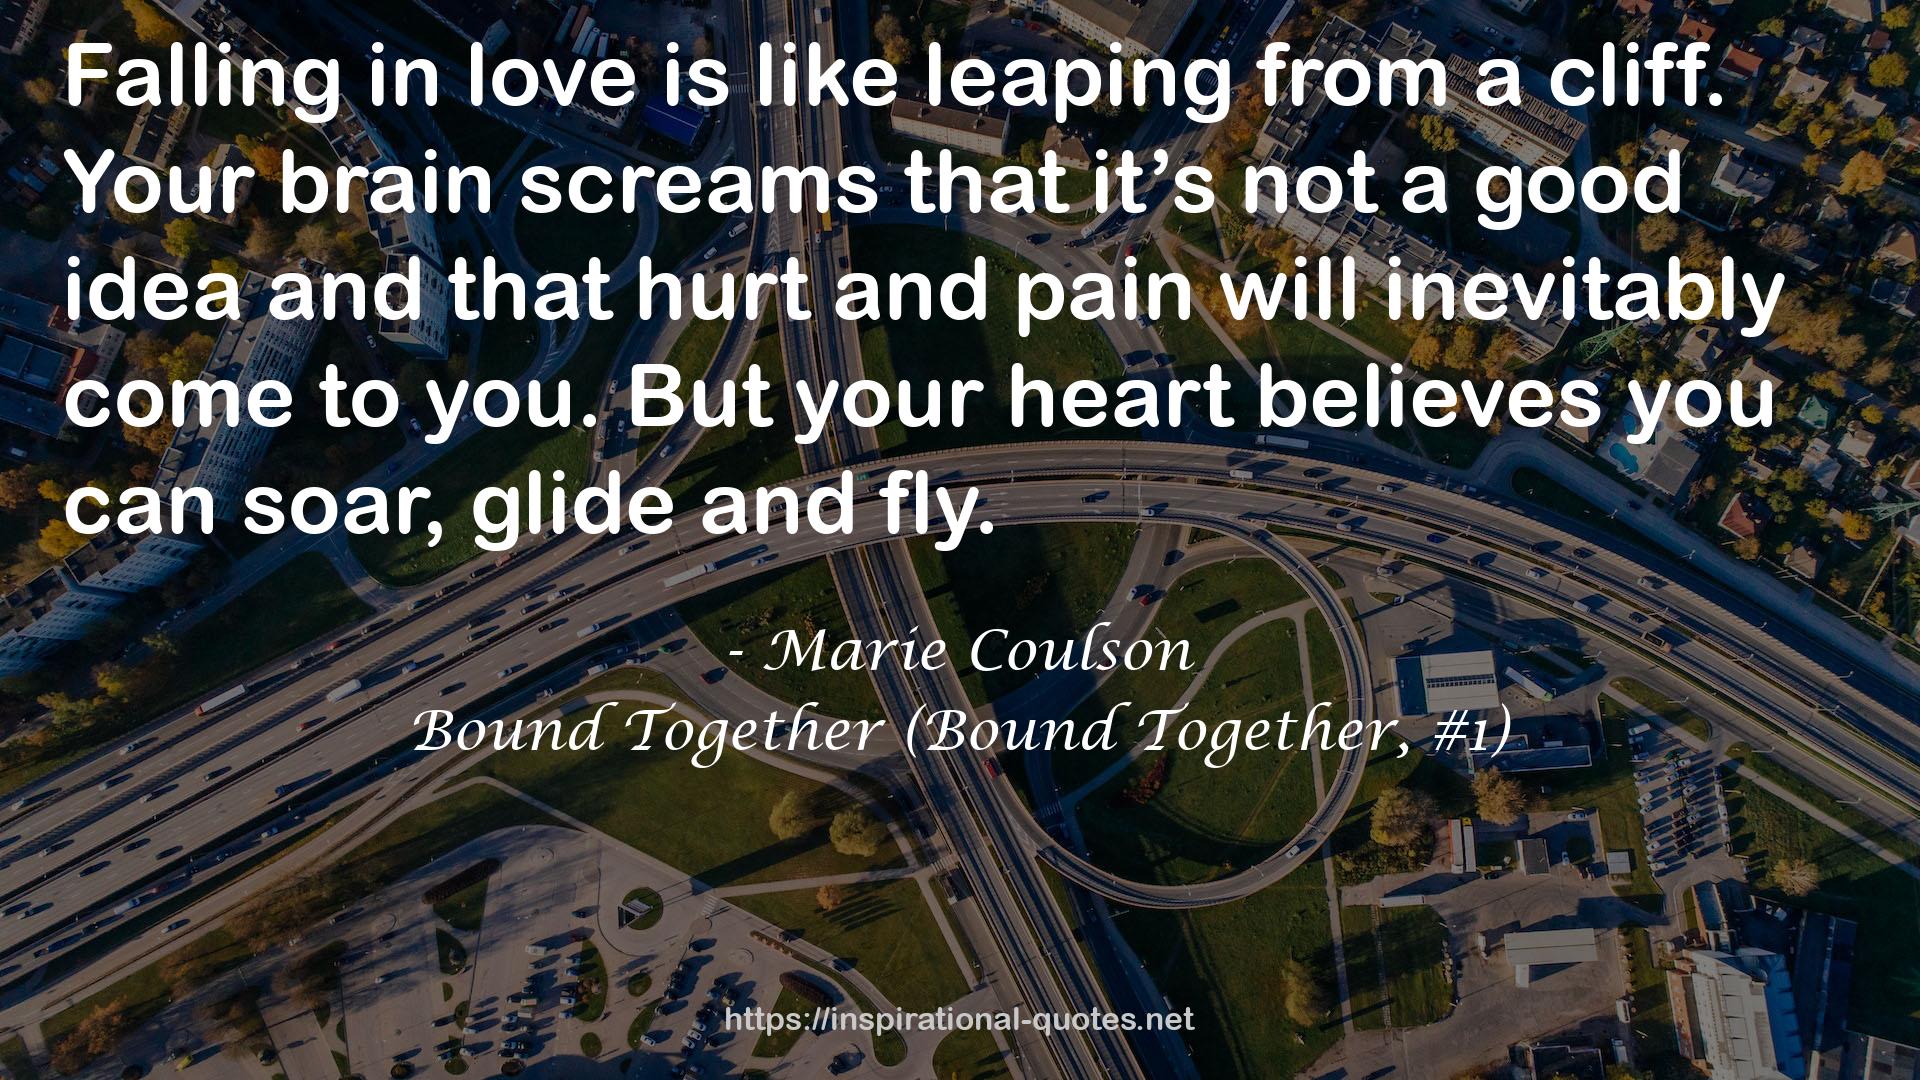 Bound Together (Bound Together, #1) QUOTES